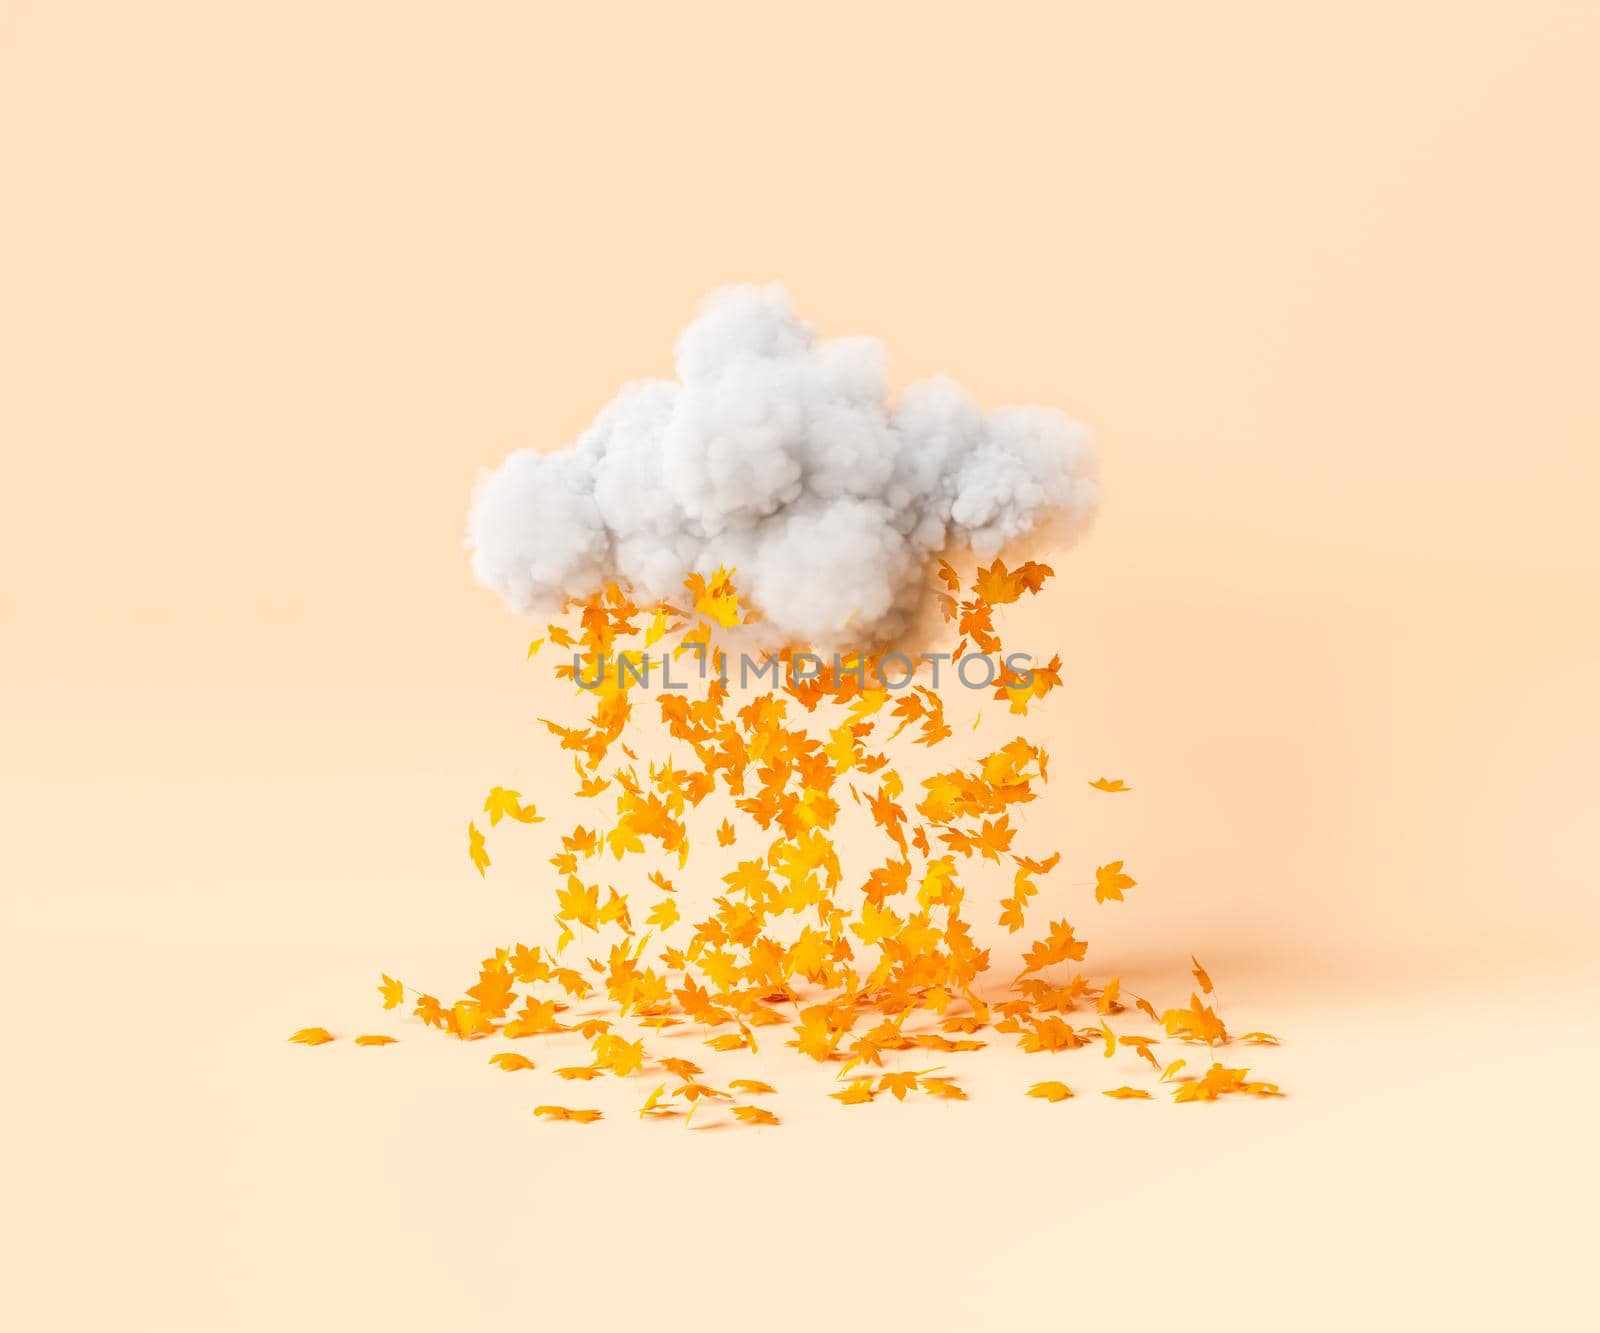 Fluffy cloud and falling autumn leaves in studio by asolano